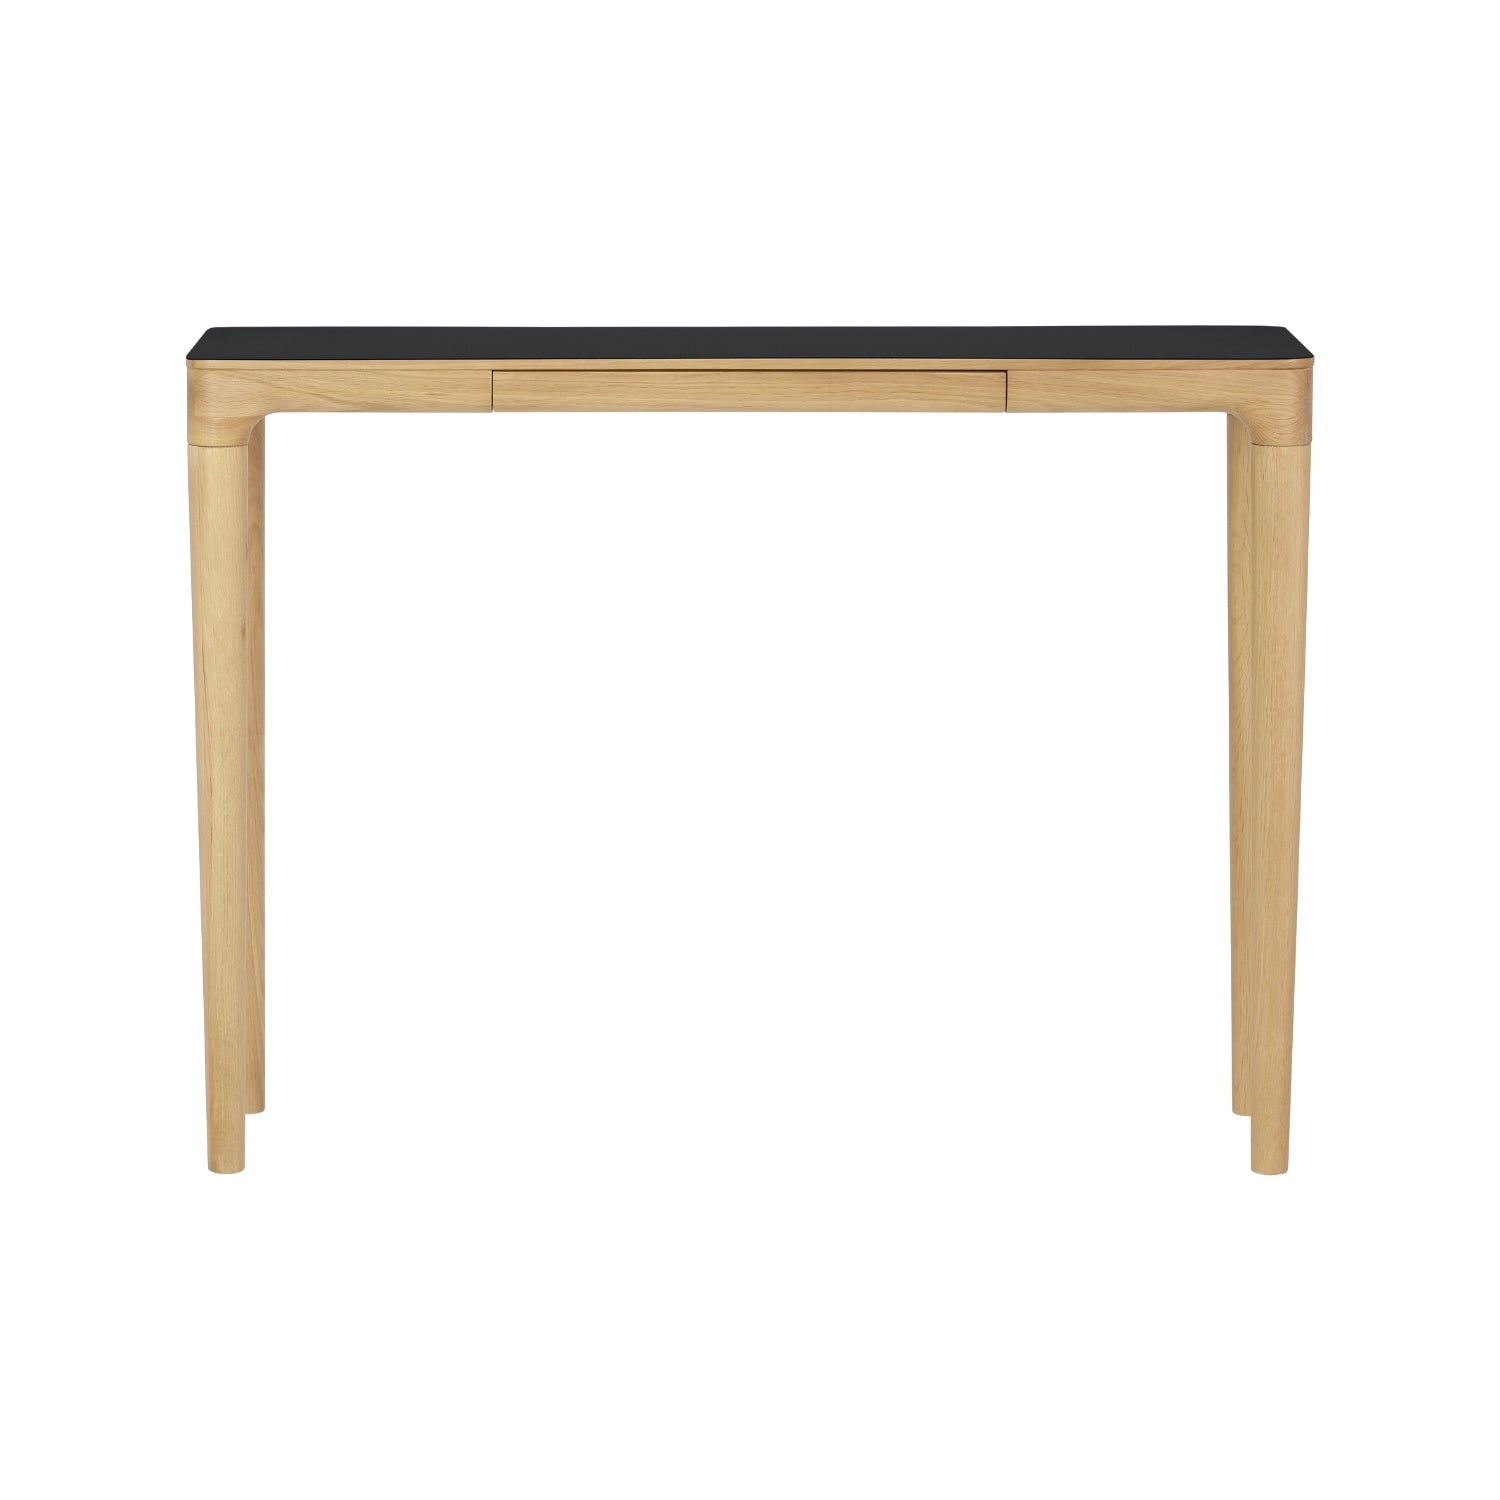 HEART'N'SOUL - Console Table